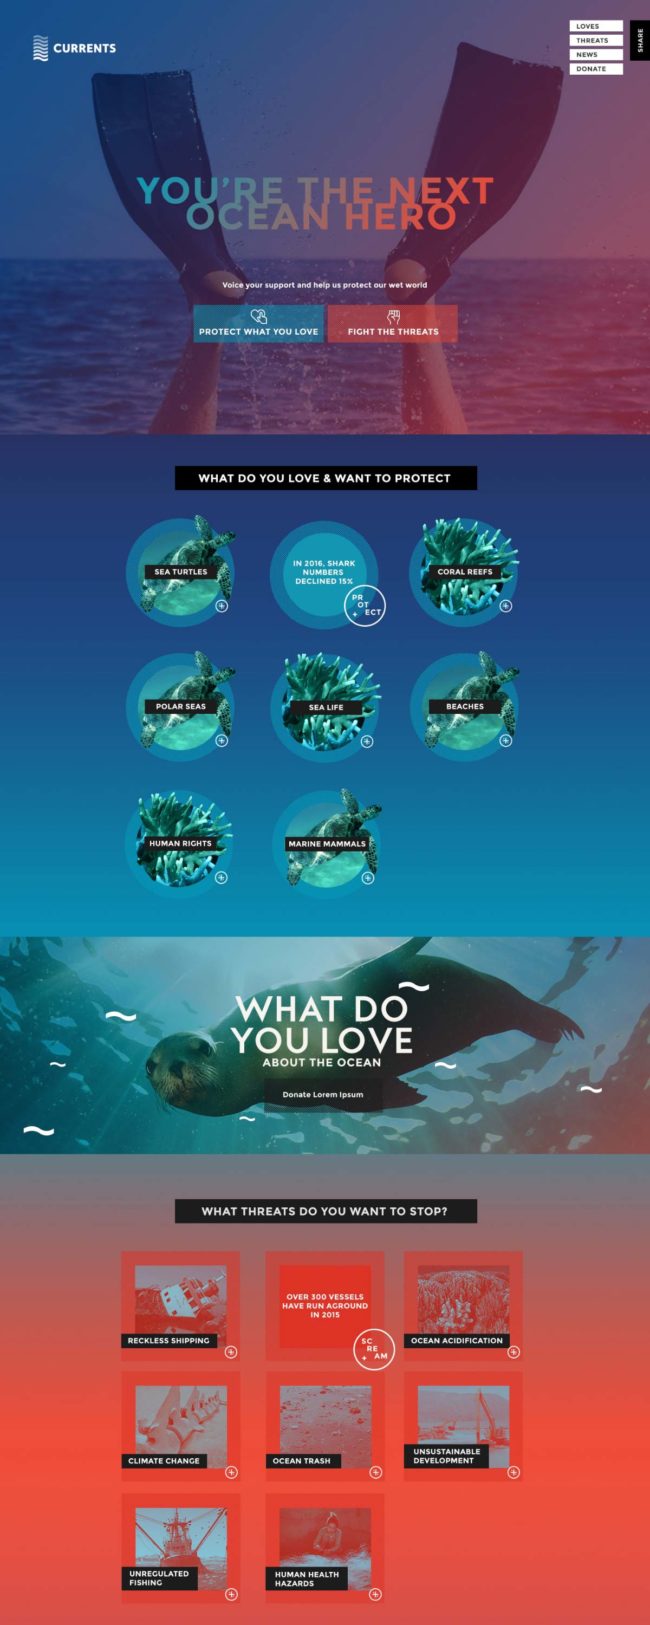 Ocean Foundation Currents homepage